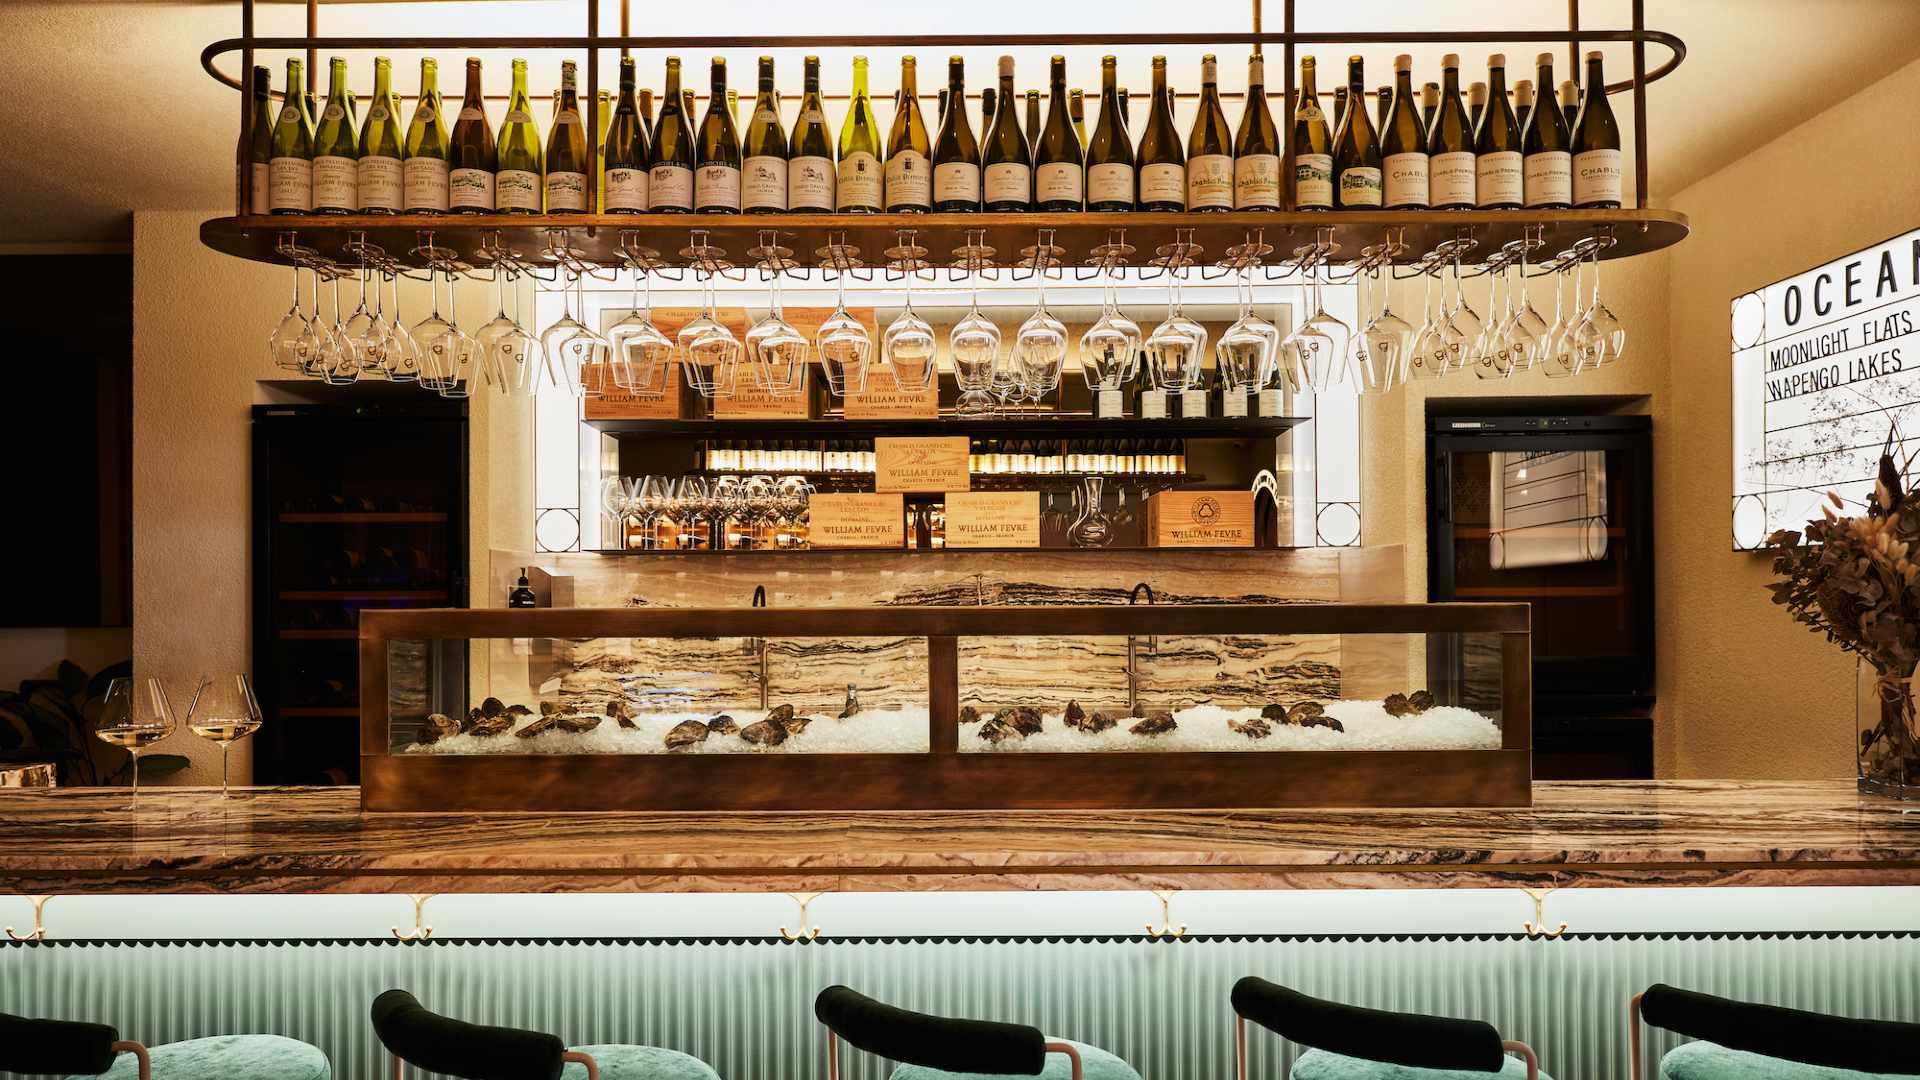 Pearl Chablis & Oyster Bar Is the Sophisticated New Spot Celebrating Bivalves and Fine French Wine